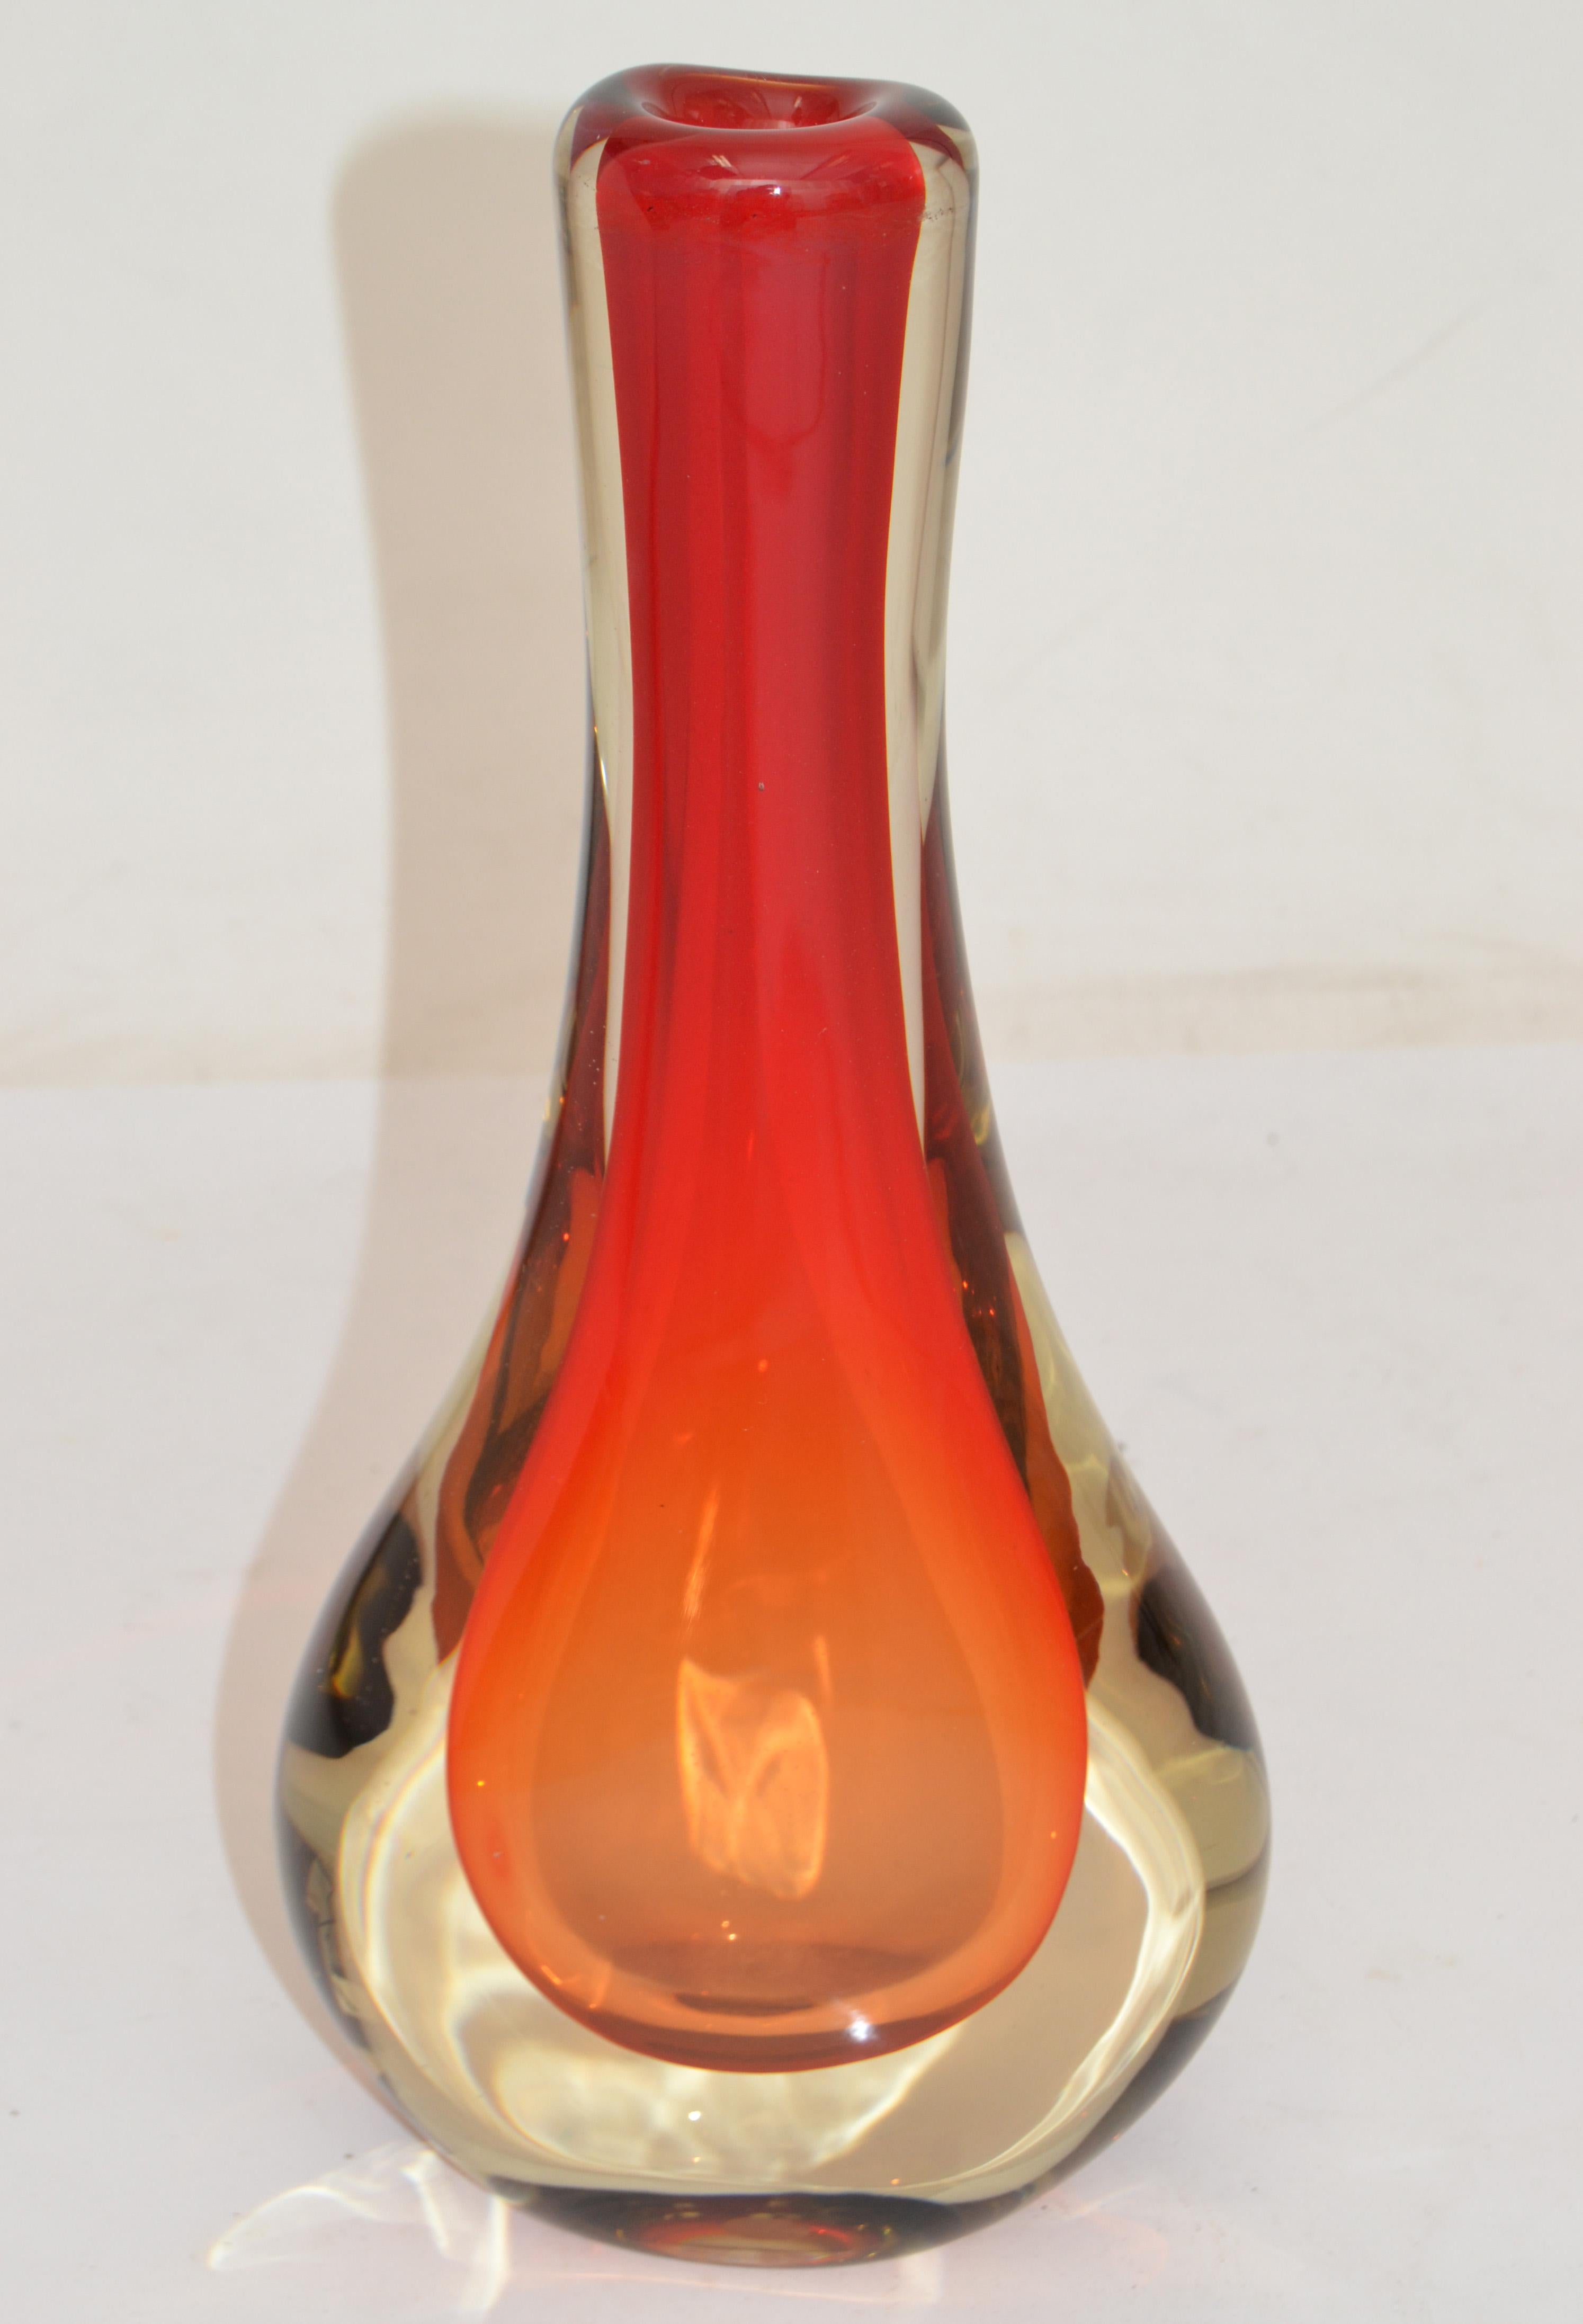 Original Novica hand blown Art Glass vase encased with 3 different colors, red, orange and transparent.
Made in Brazil in the late 1970s.
Looks stunning in any angle.
Labeled at the Base, hand blown Collection made in Brazil, NOVICA.
Some light